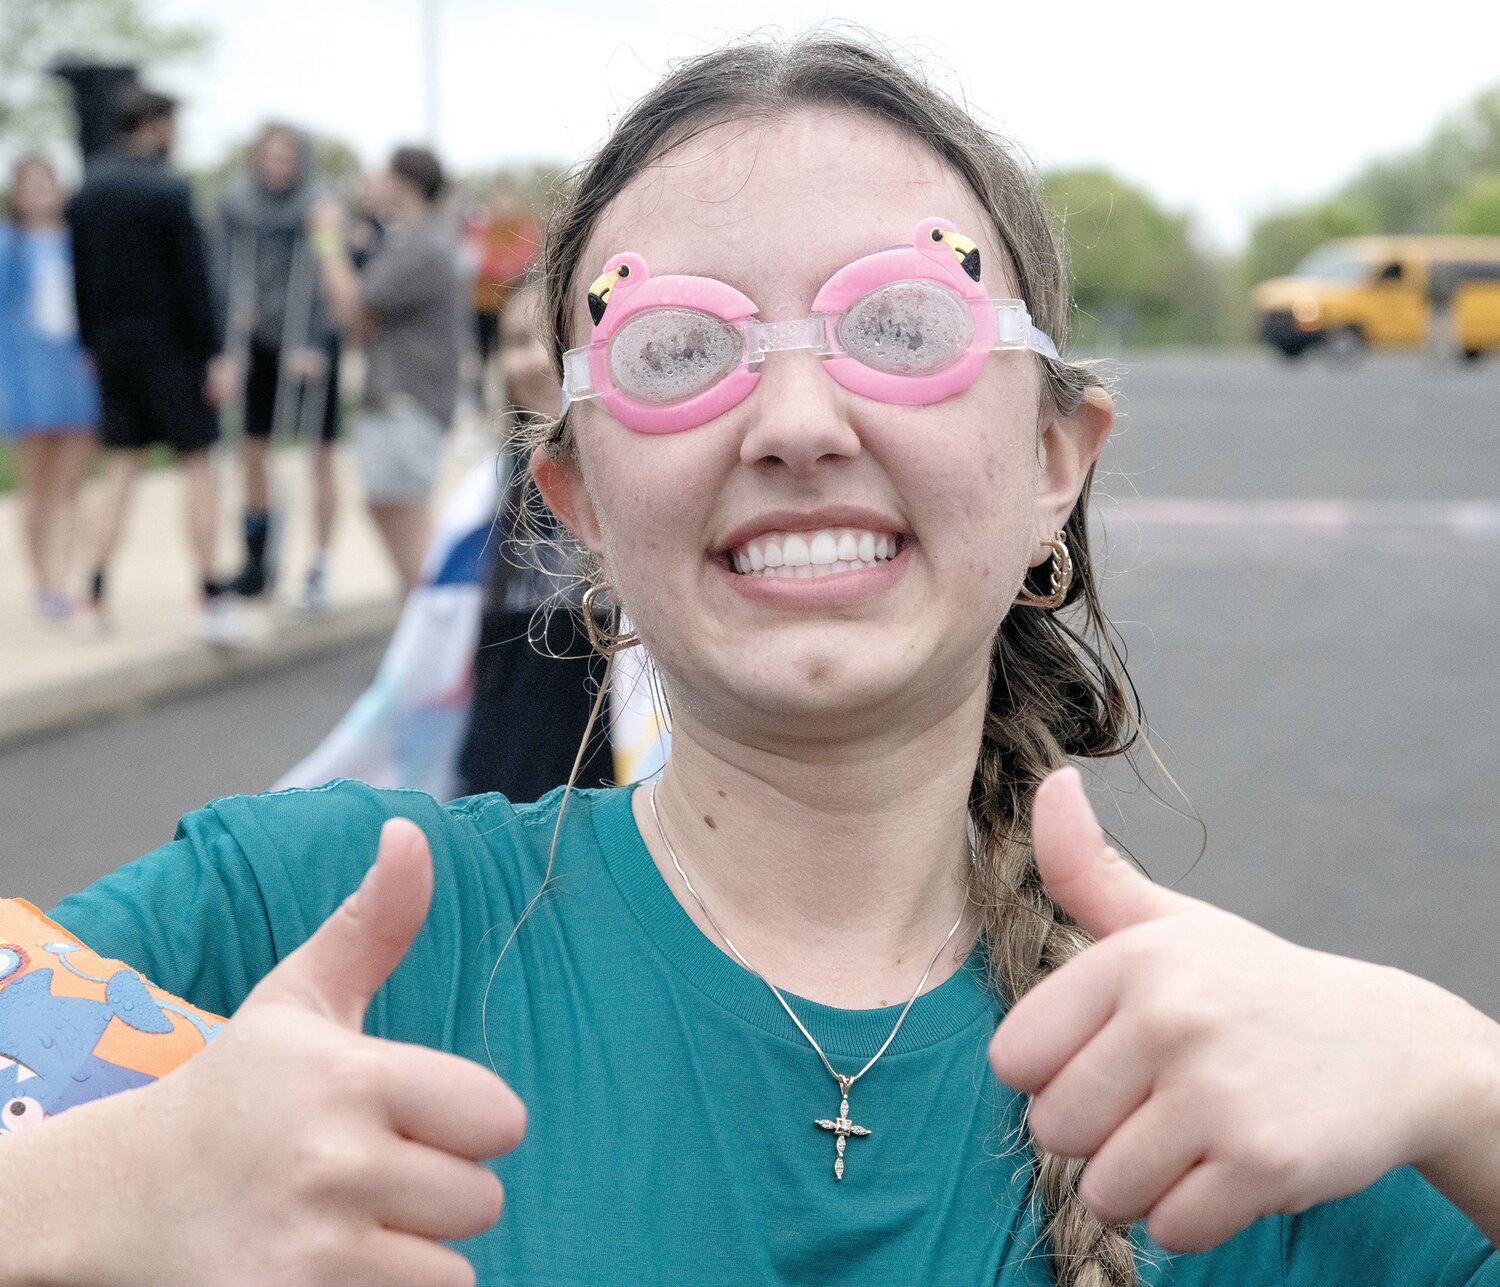 Heidi Landis, donning goggles, gives a double thumbs up.